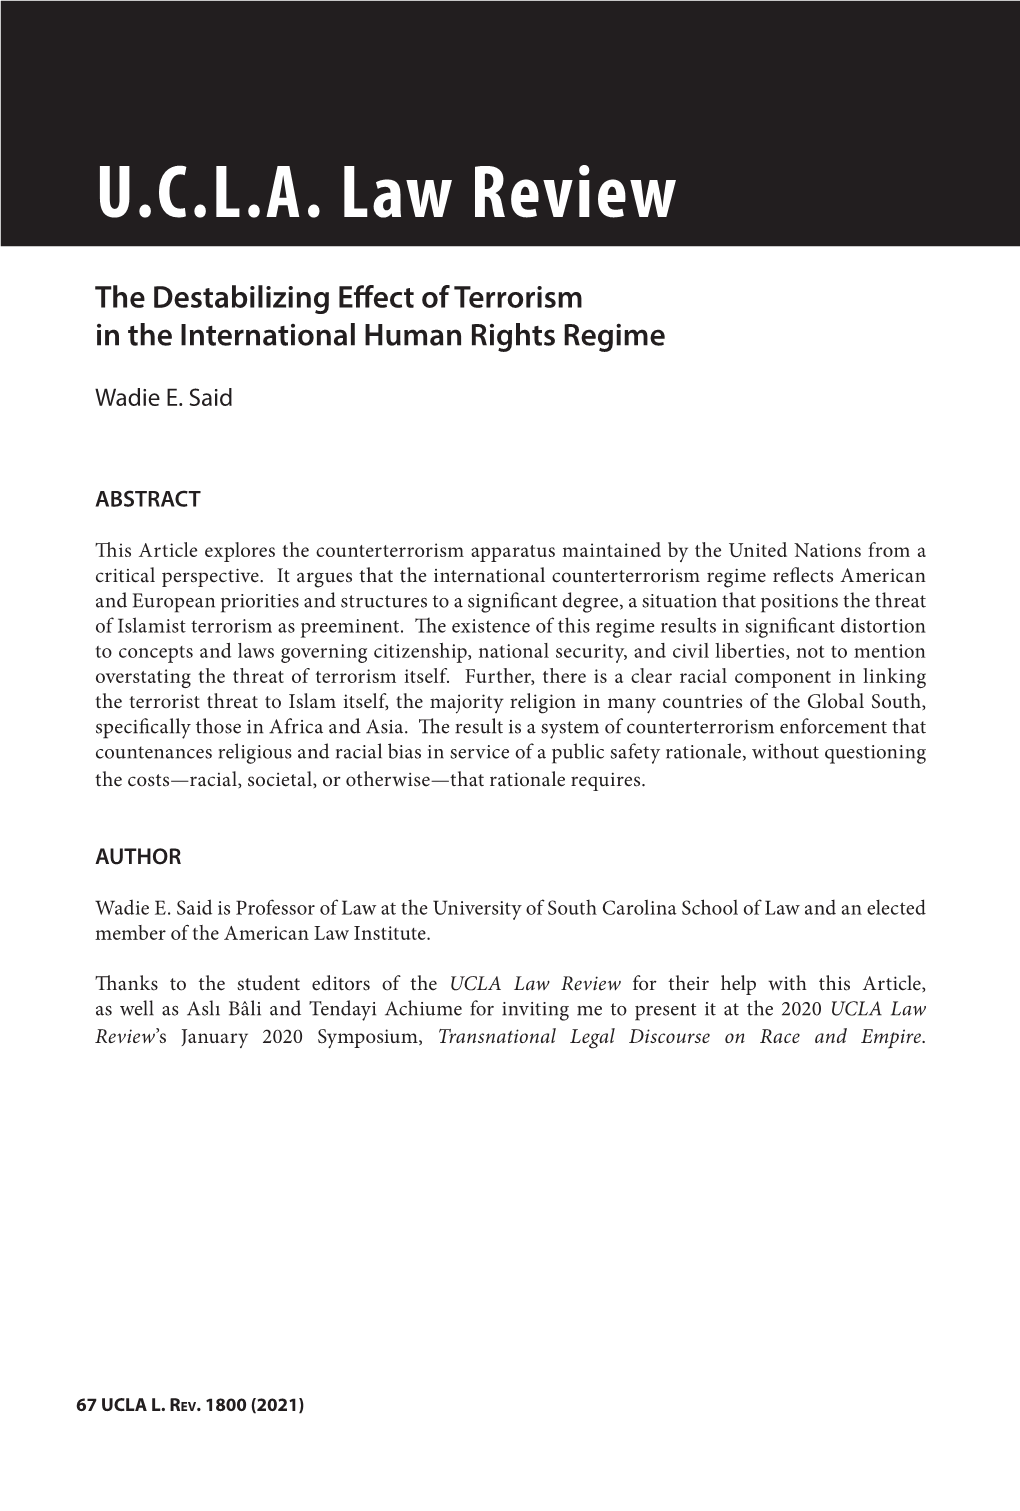 UCLA Law Review the Destabilizing Effect of Terrorism in The